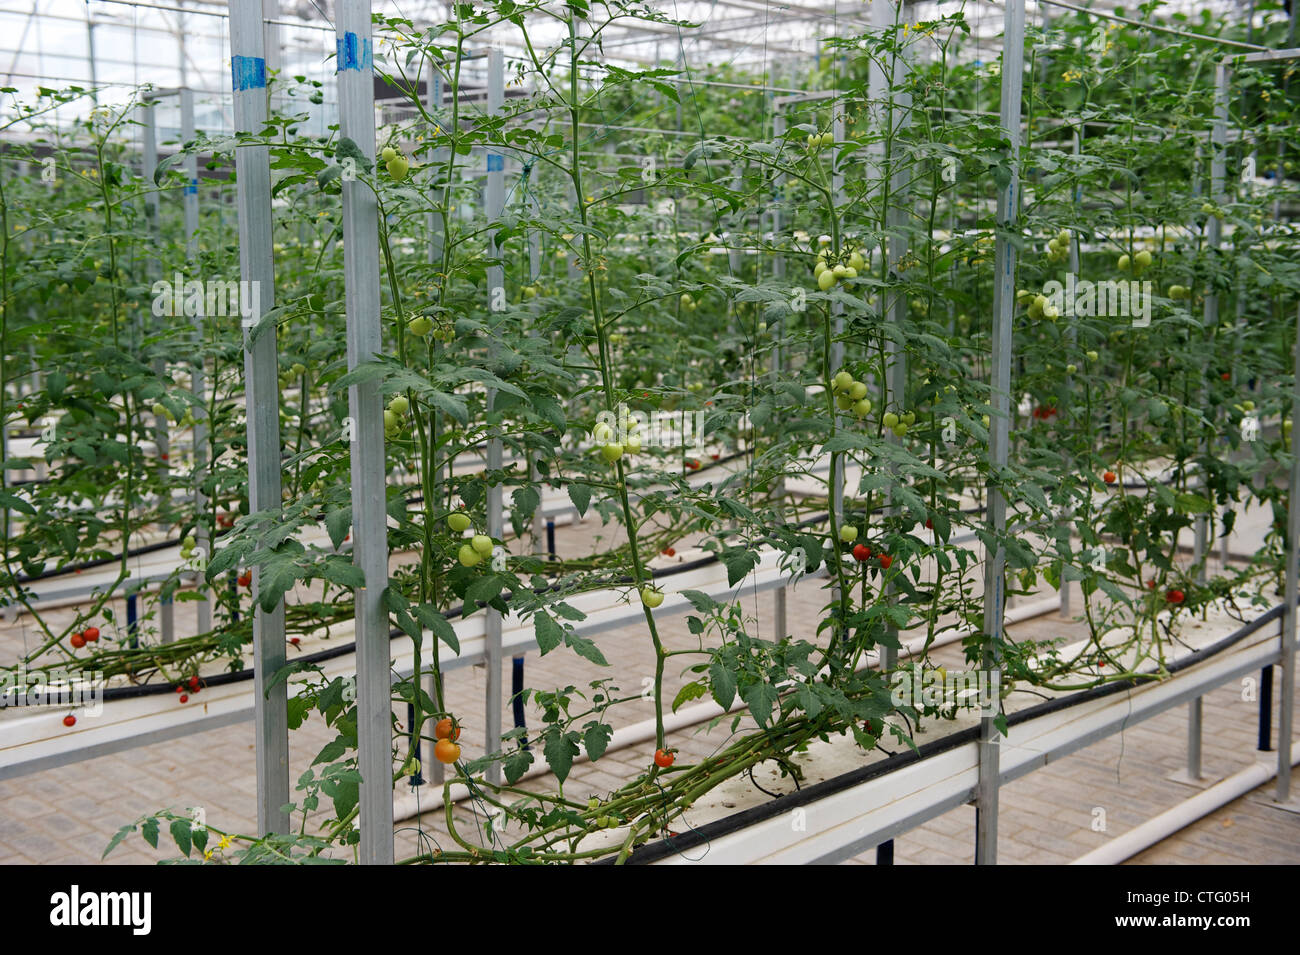 Tomato grown with nutrient fluid in China. Stock Photo